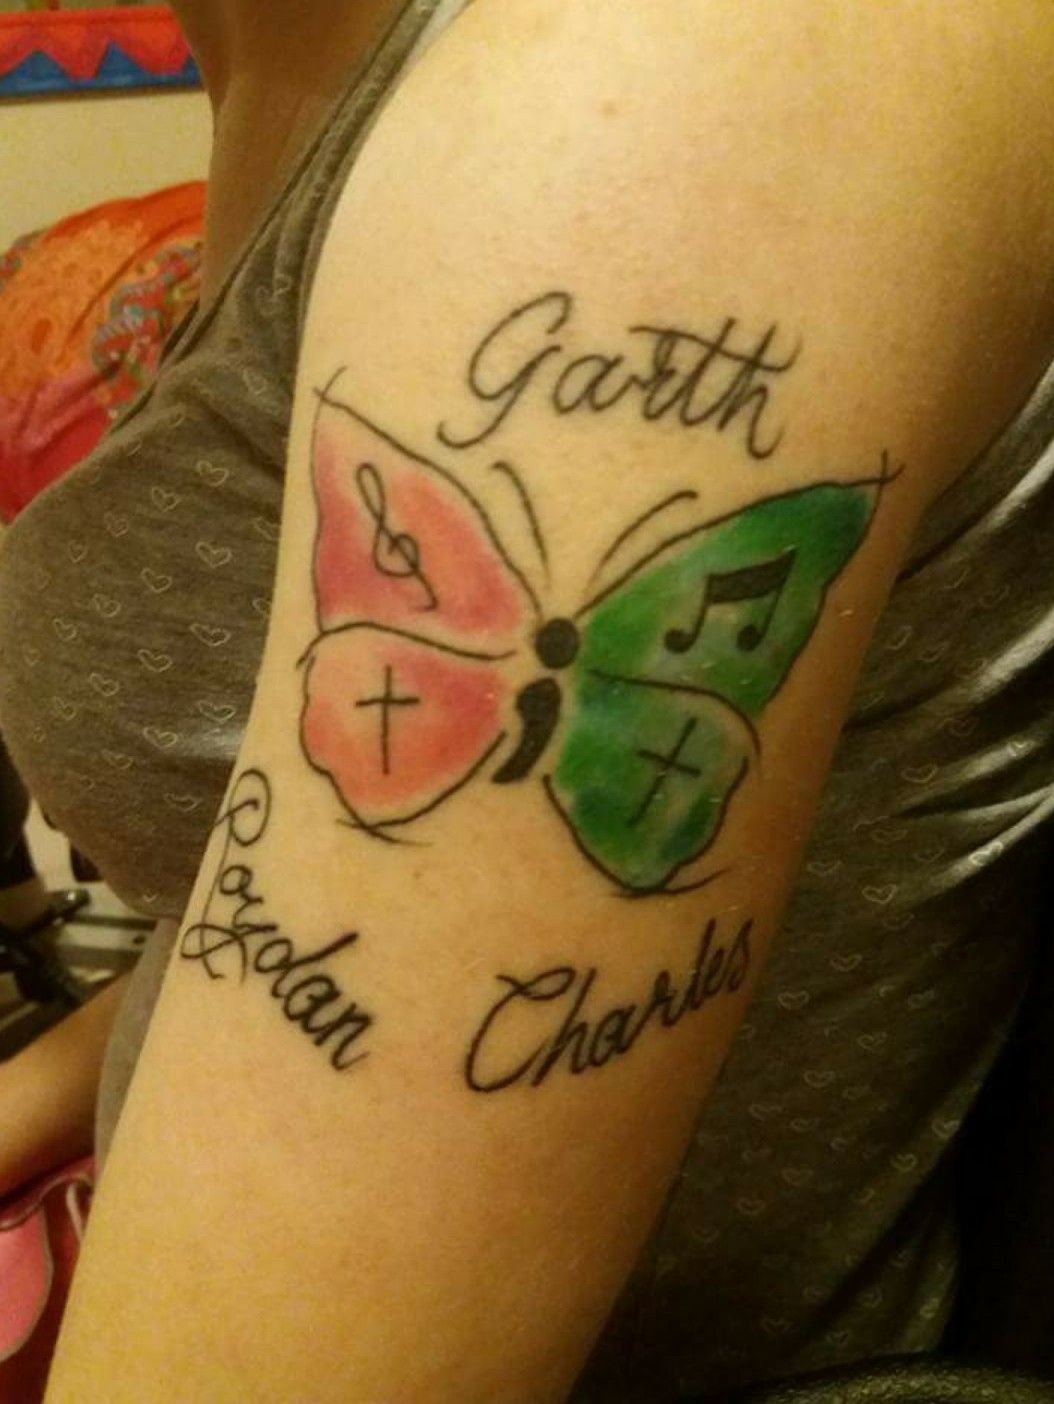 Endless Summer Tattoo  Repost joecarotattooing  For his twins  one has cerebral palsy and one has autism Super happy to have done this  tattoo for him  Facebook